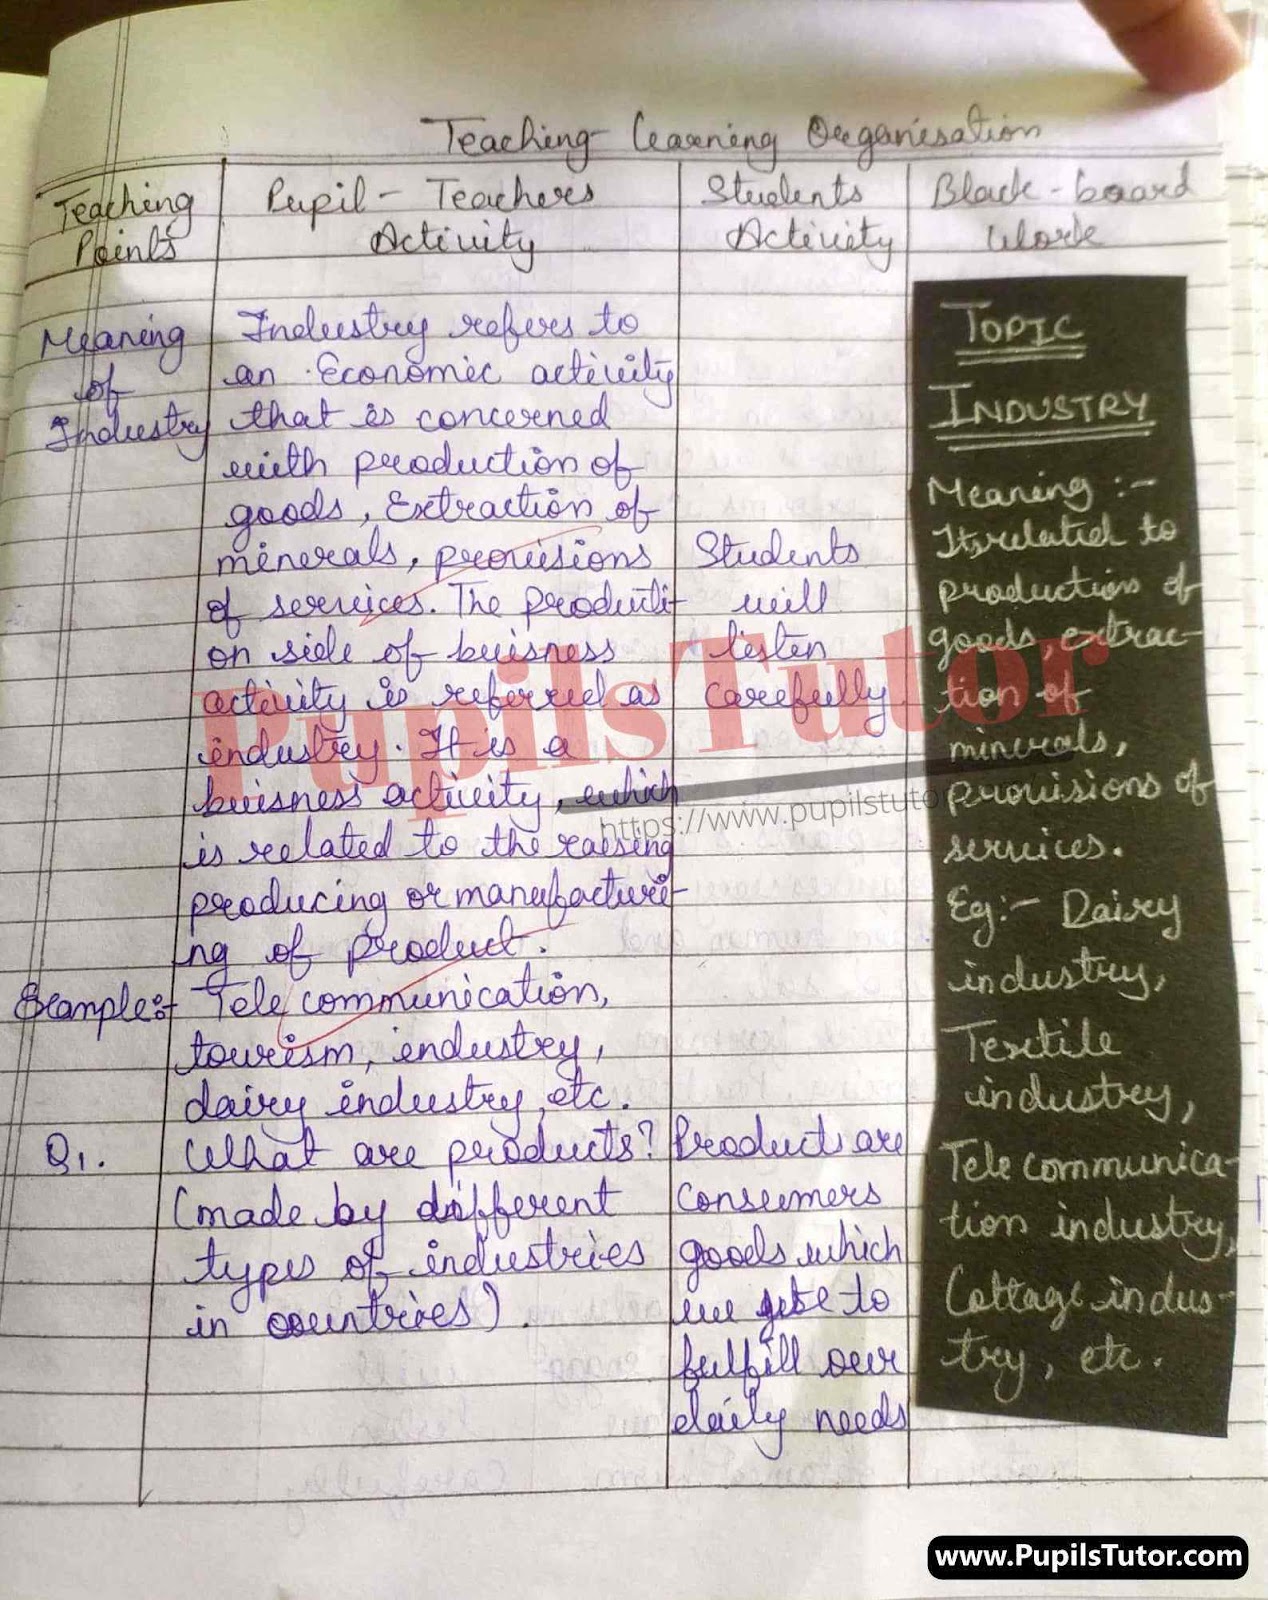 Economics Lesson Plan On Industry For Class/Grade 11 For CBSE NCERT School And College Teachers  – (Page And Image Number 3) – www.pupilstutor.com